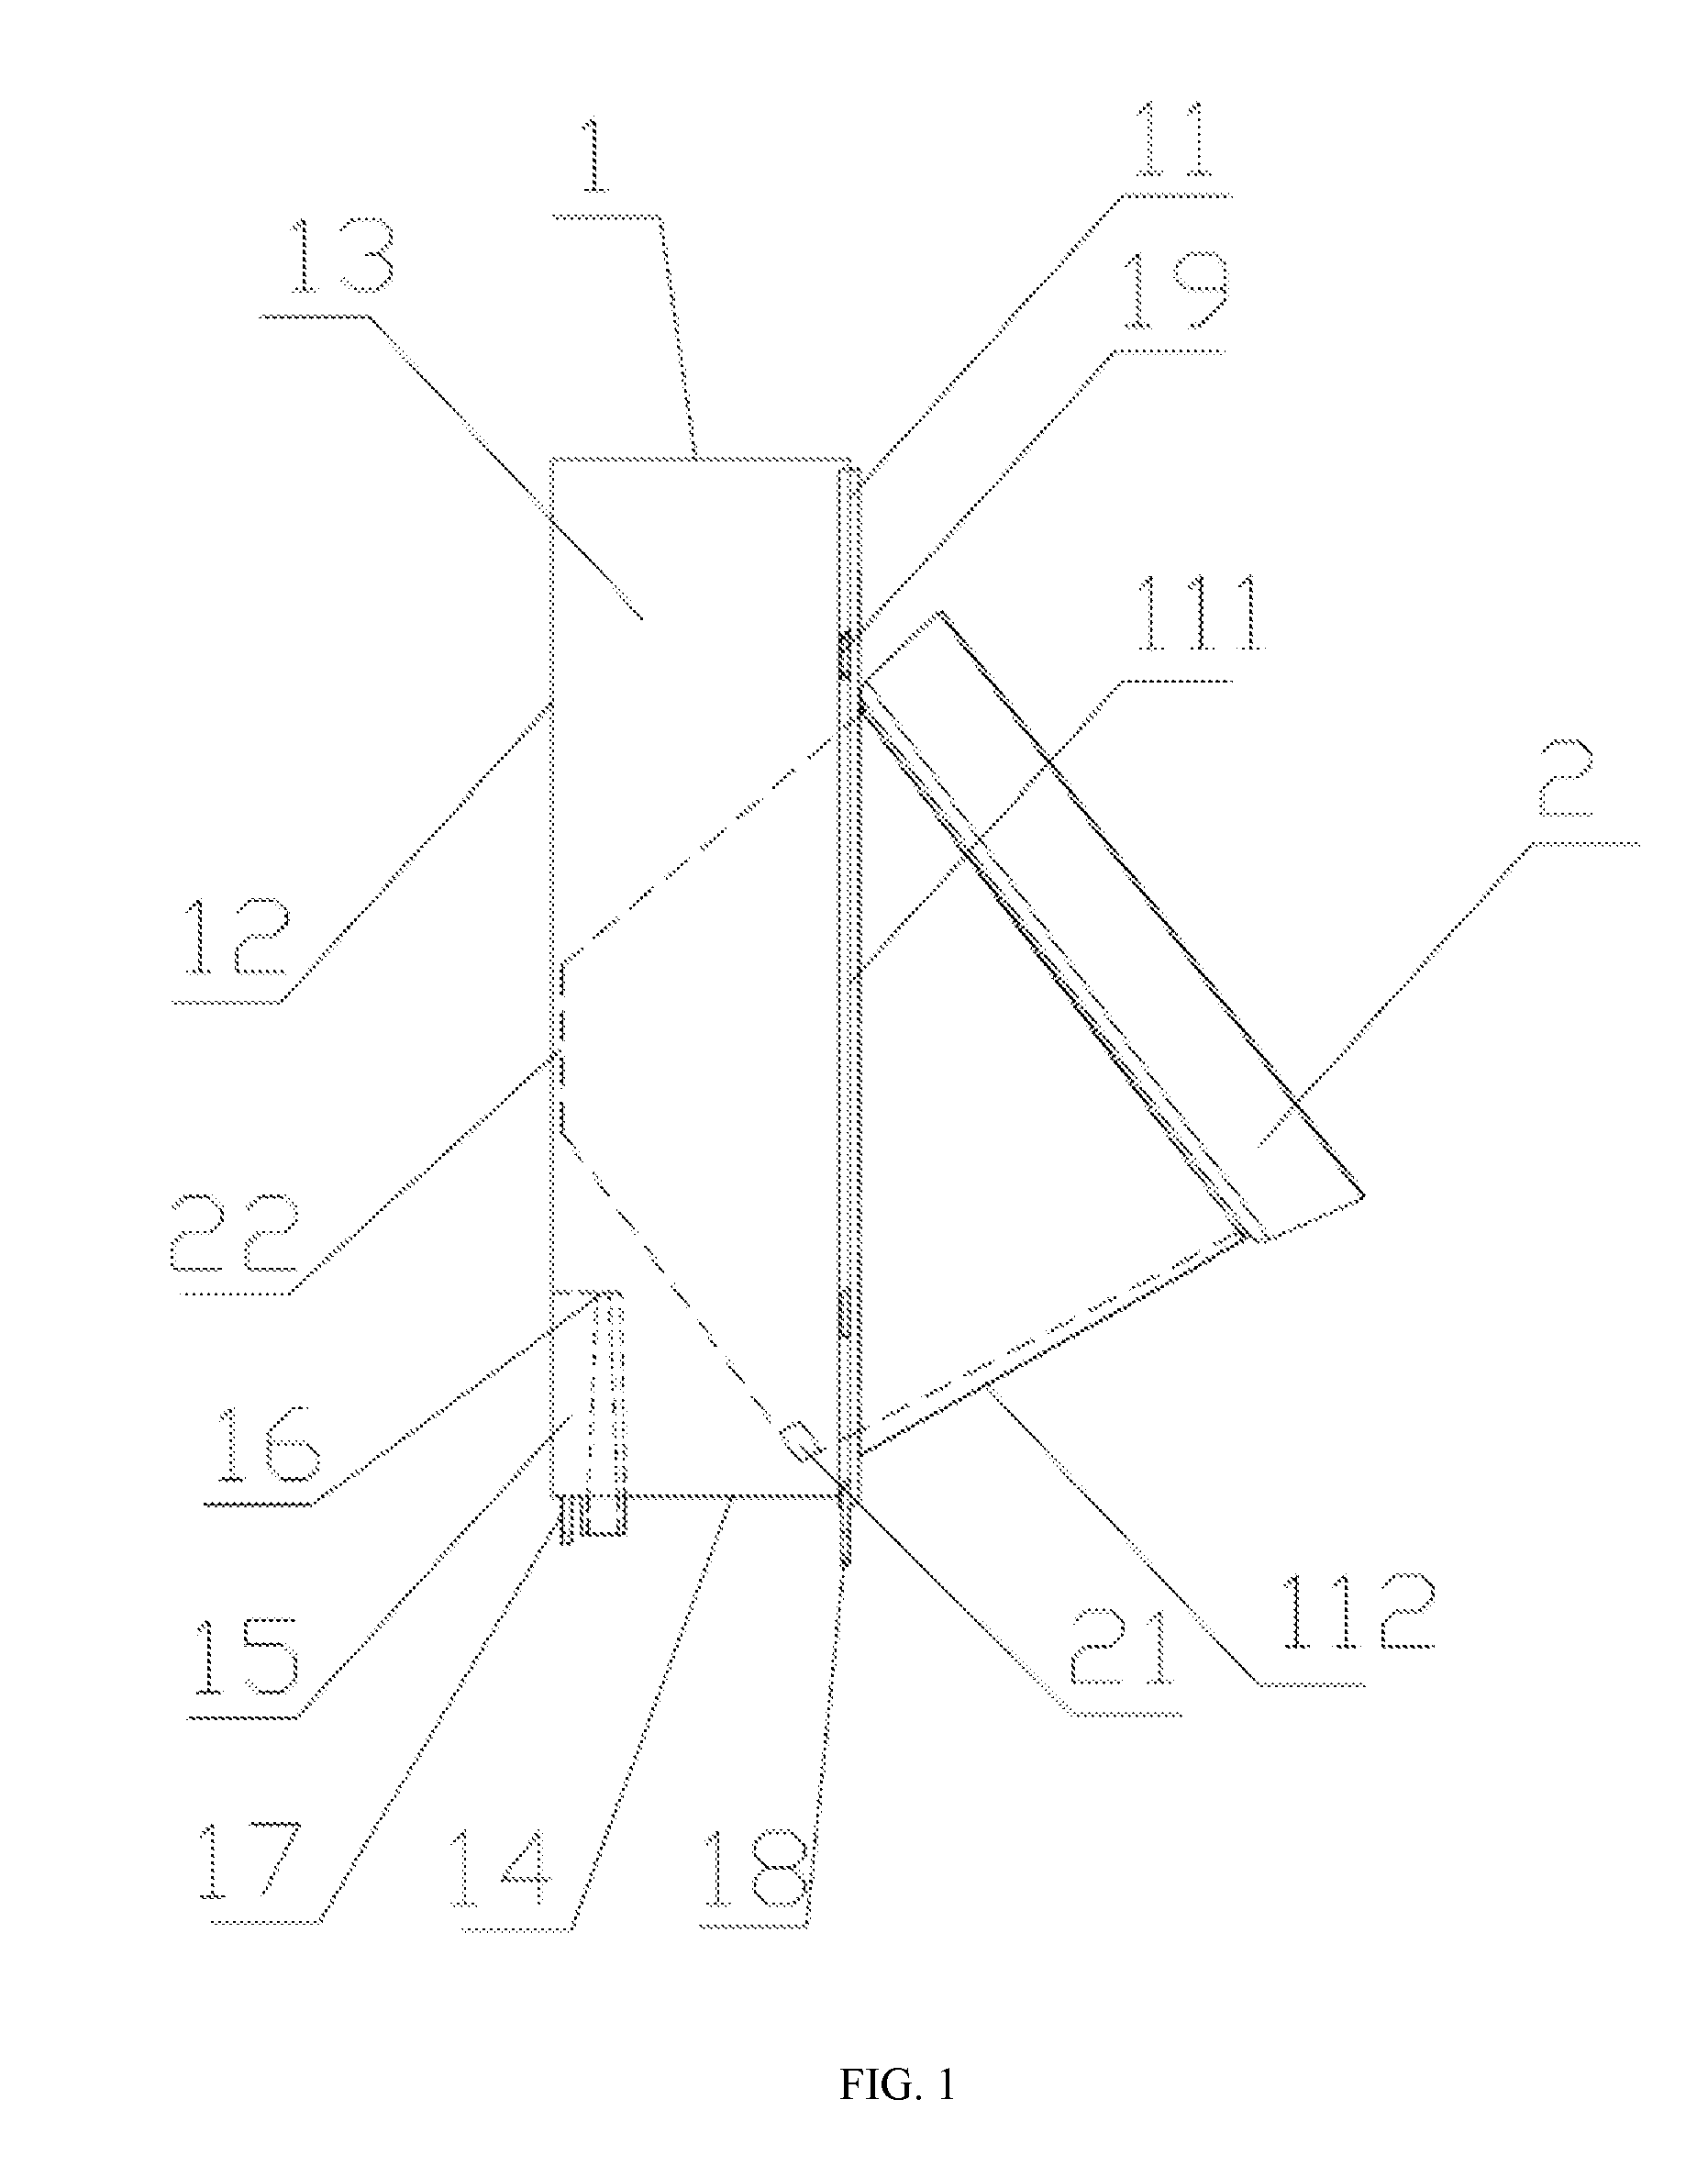 Self-infiltration irrigation, assemblable, obliquely inserted modular multifunctional wall greening apparatus